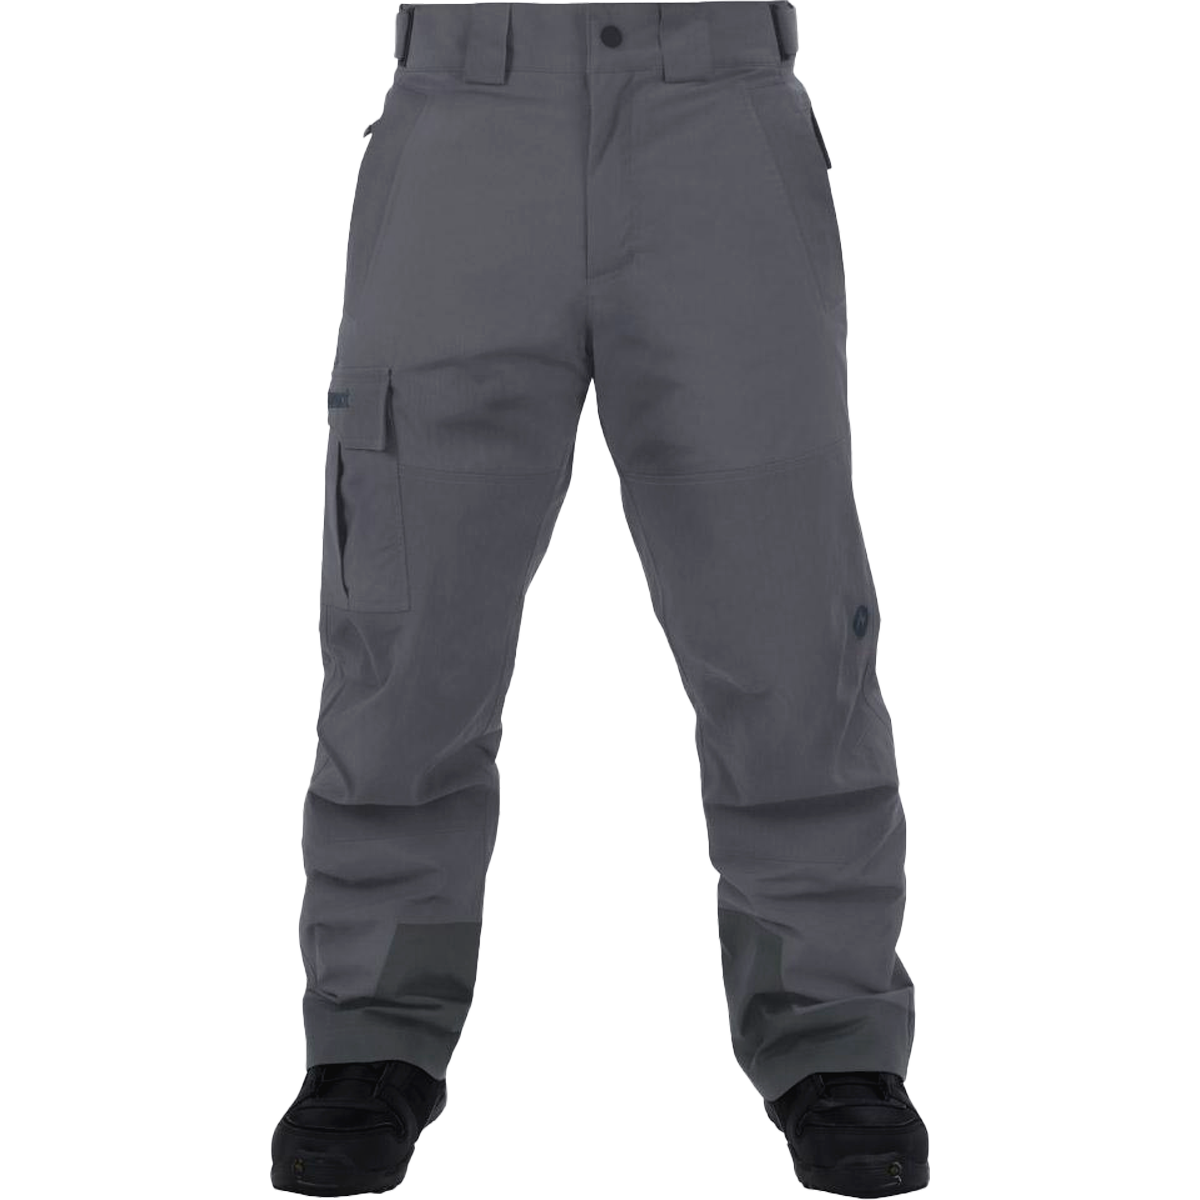 These pants are called zip pocket cargo joggers in shade duffle bag. #